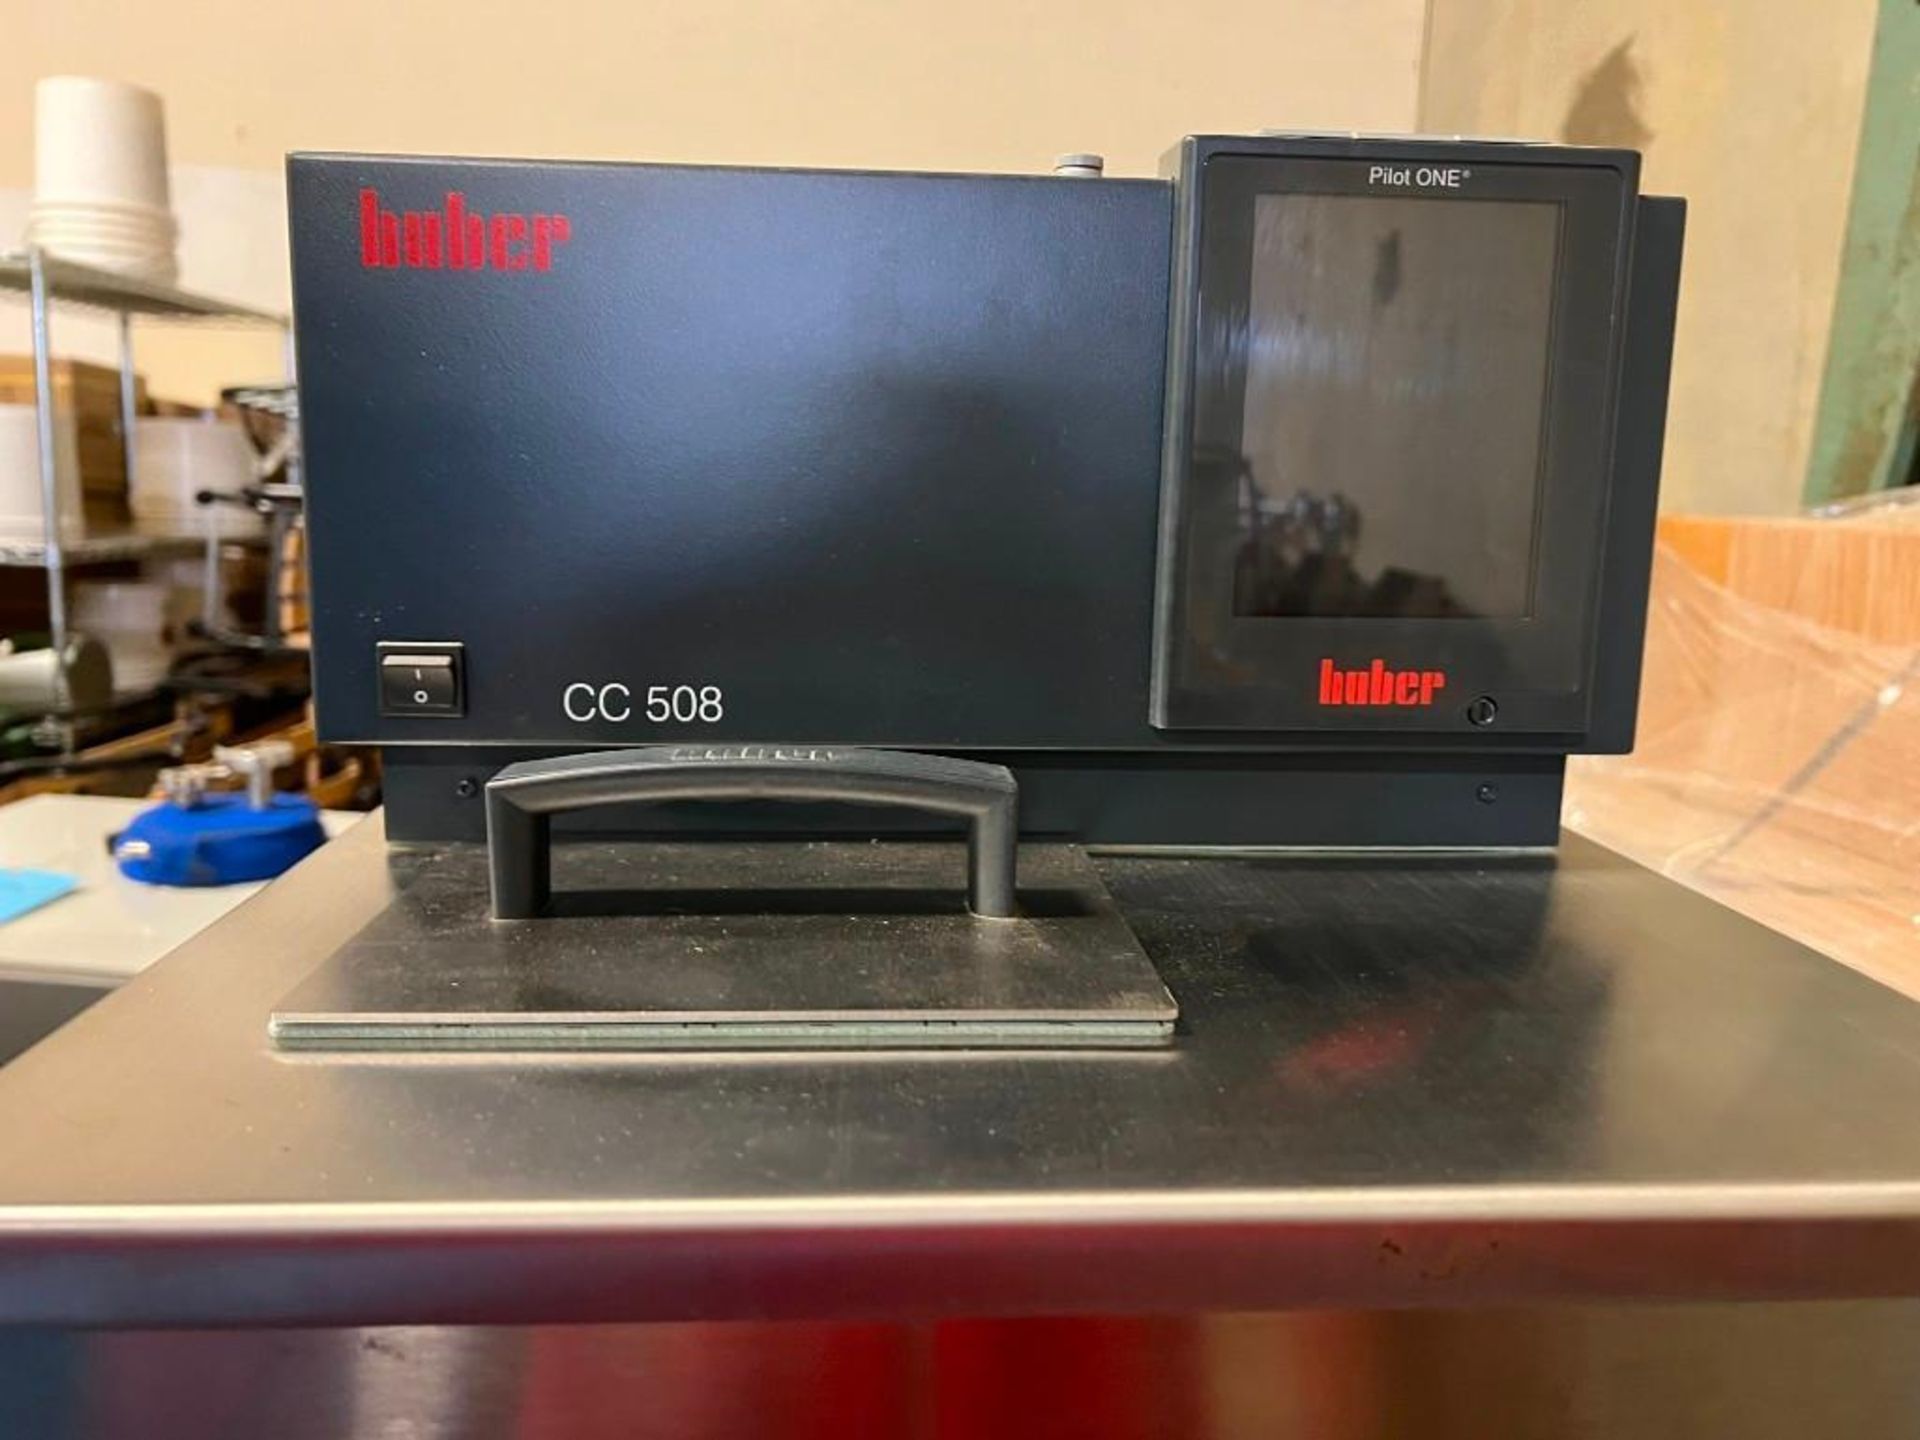 NEW Huber Refrigeration Bath Circulator, Model CC 508, Serial# 351051. With Pilot One controller. - Image 11 of 11